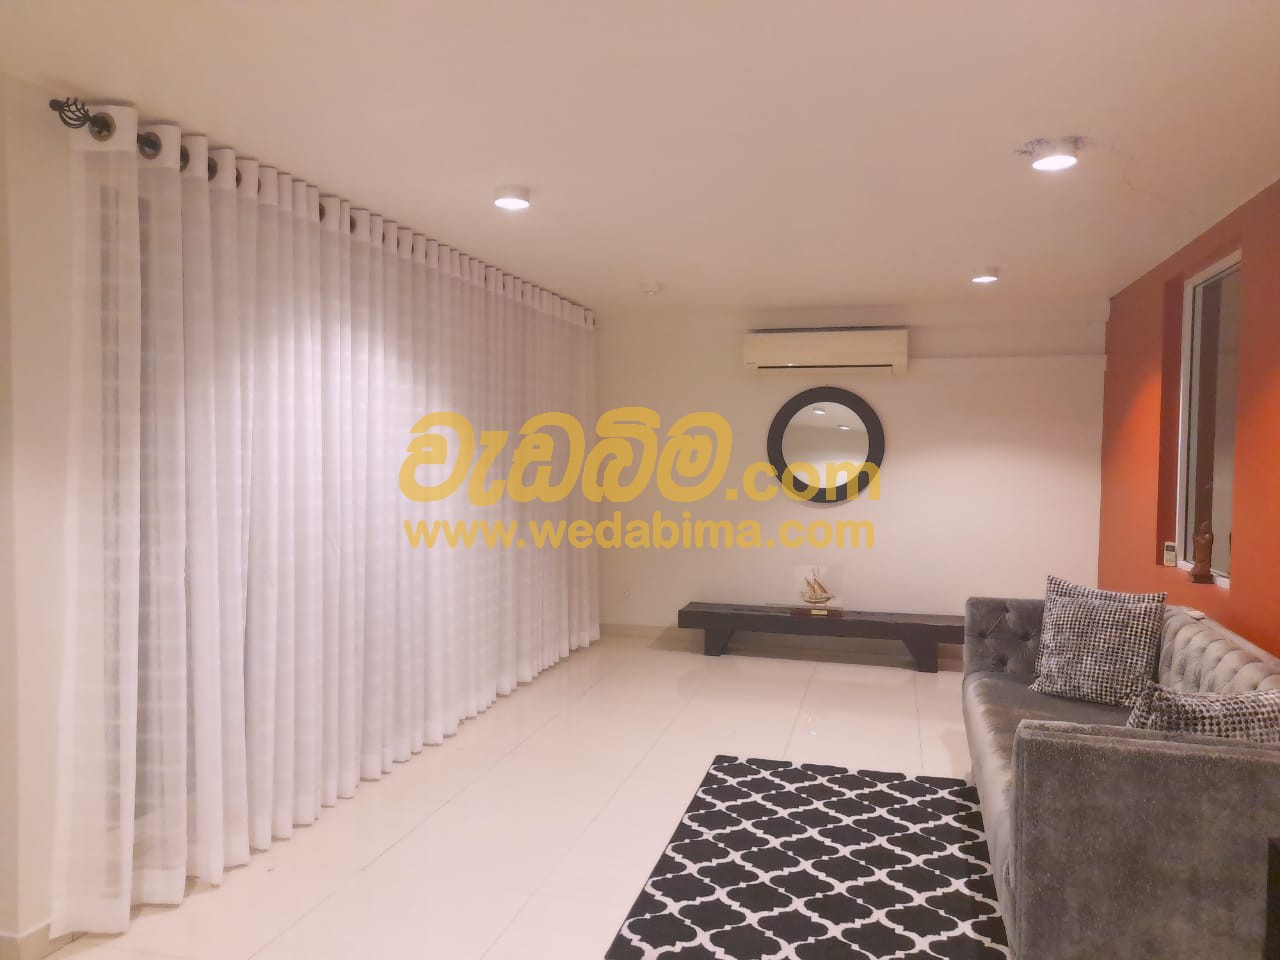 Latest Curtain Designs In Sri Lanka for Affordable Price